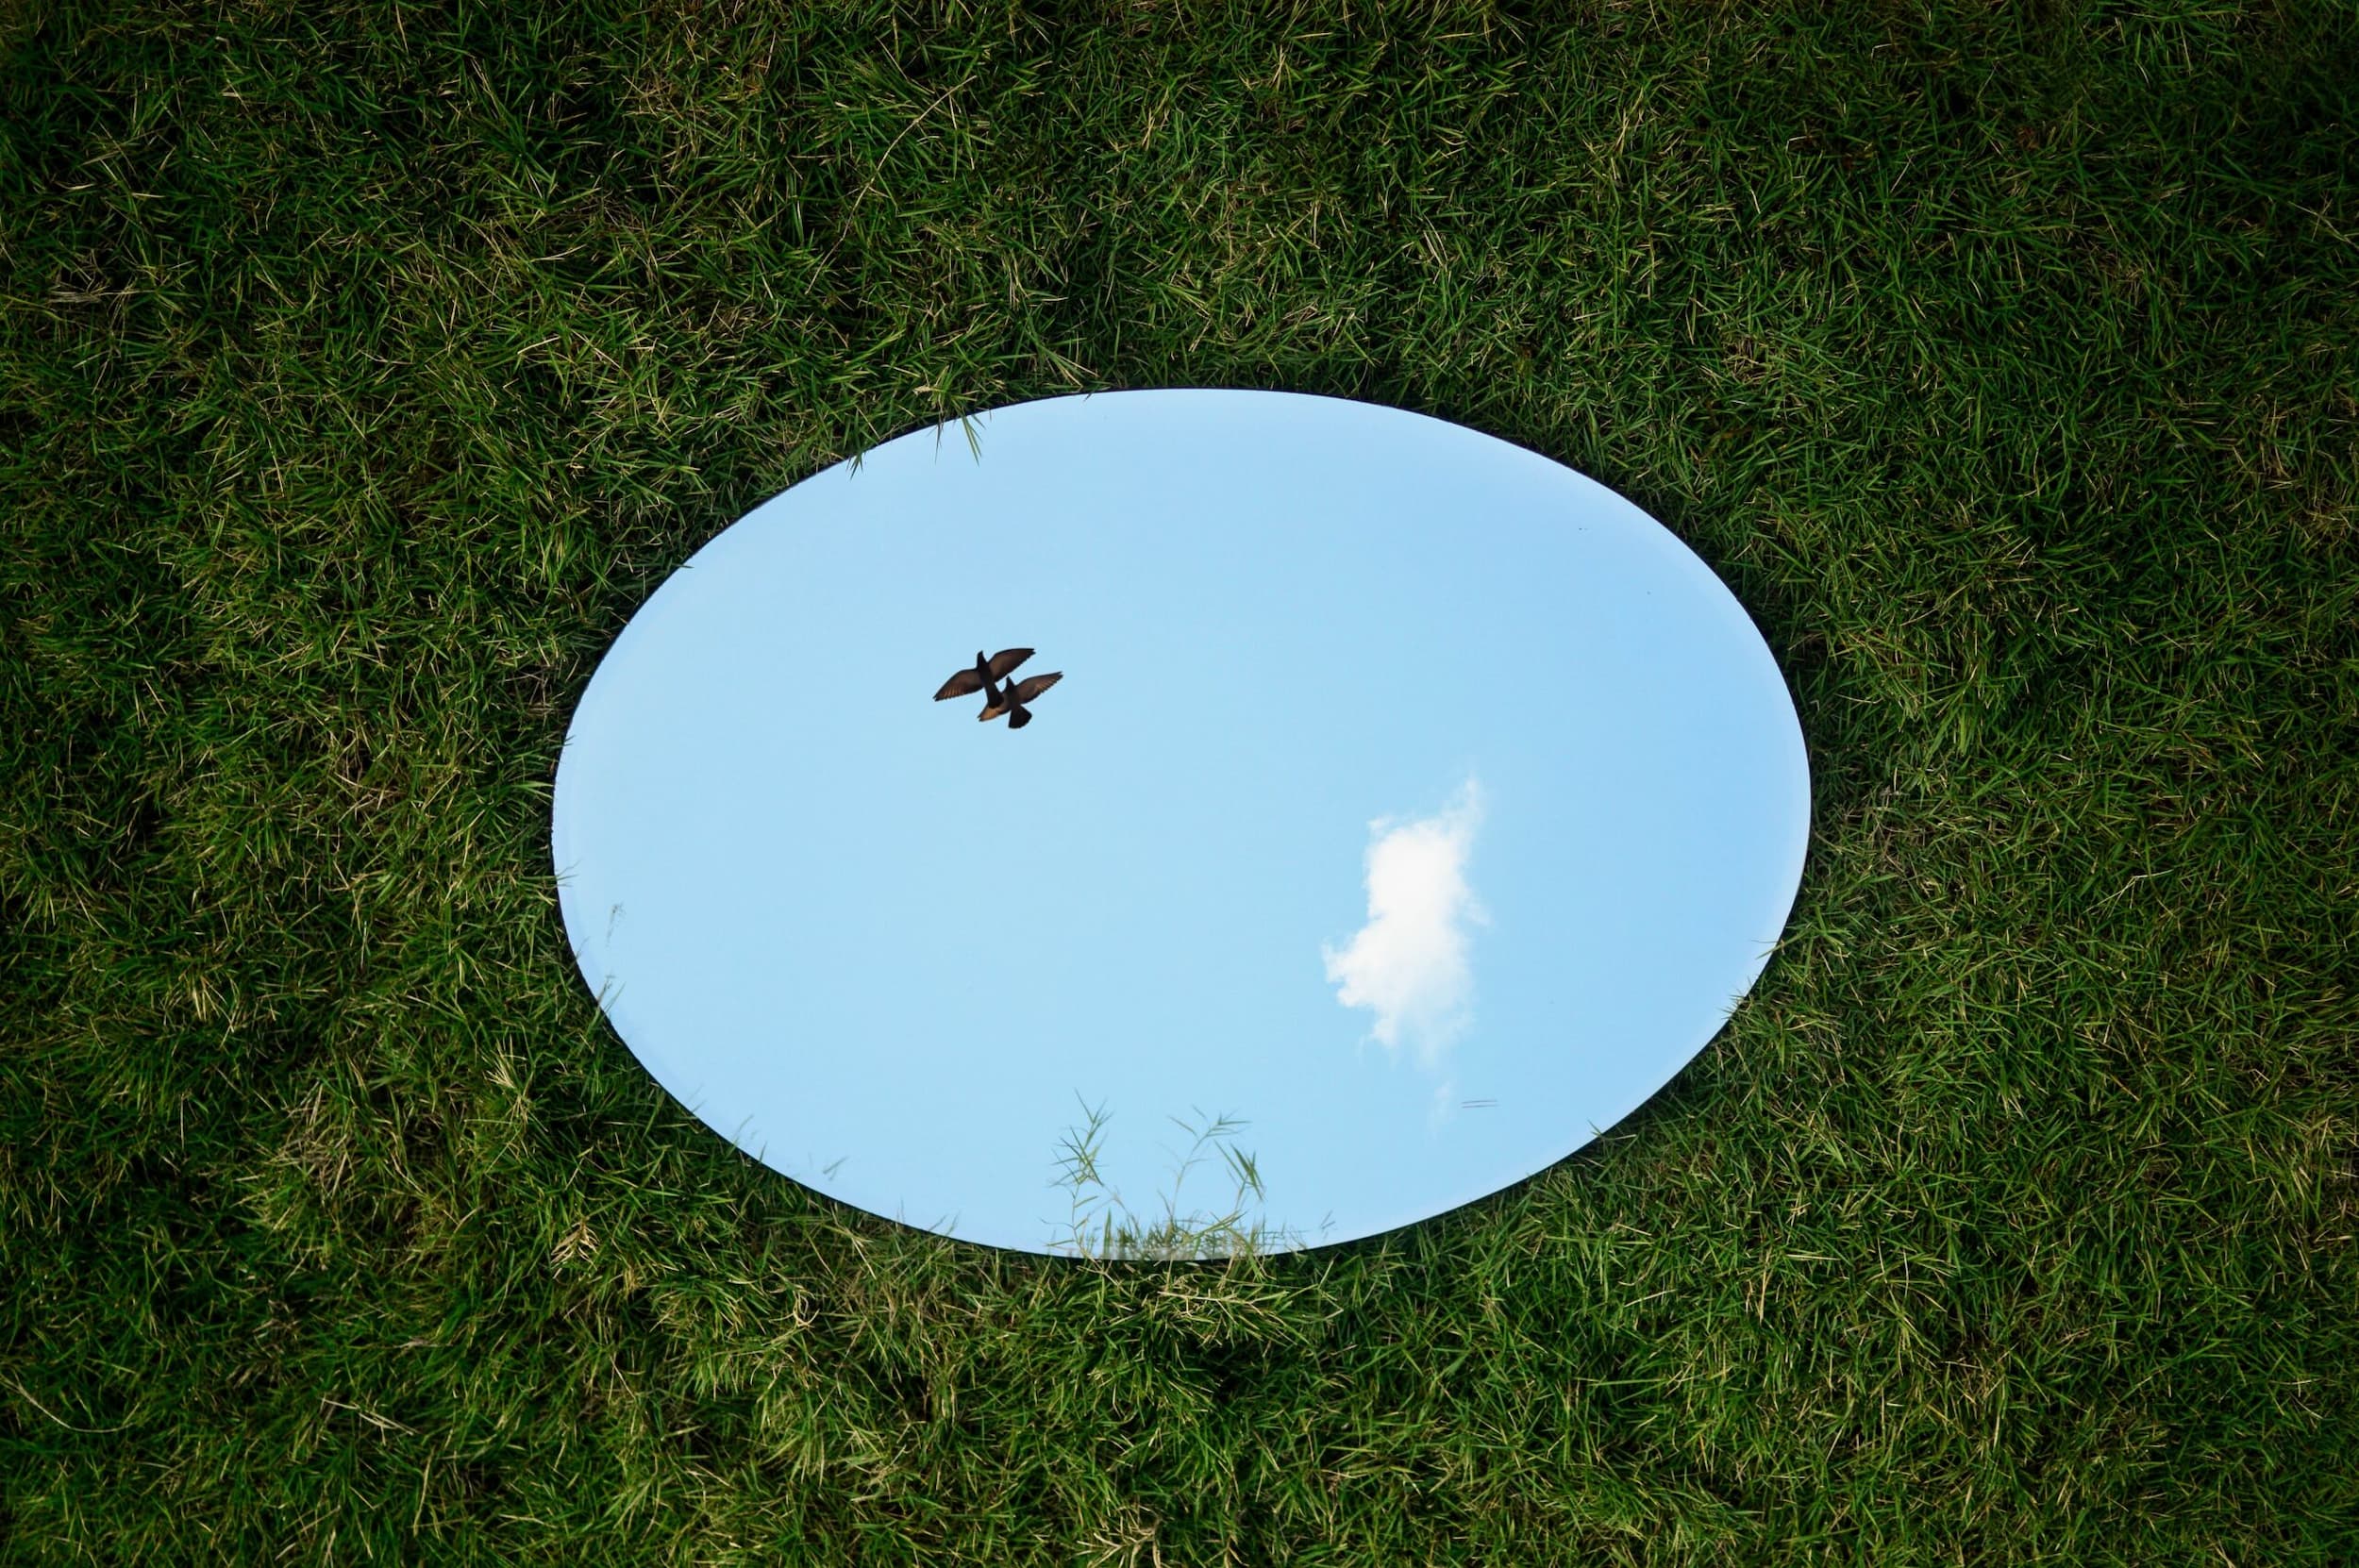 Photo of a mirror in a grassy field reflecting the sky